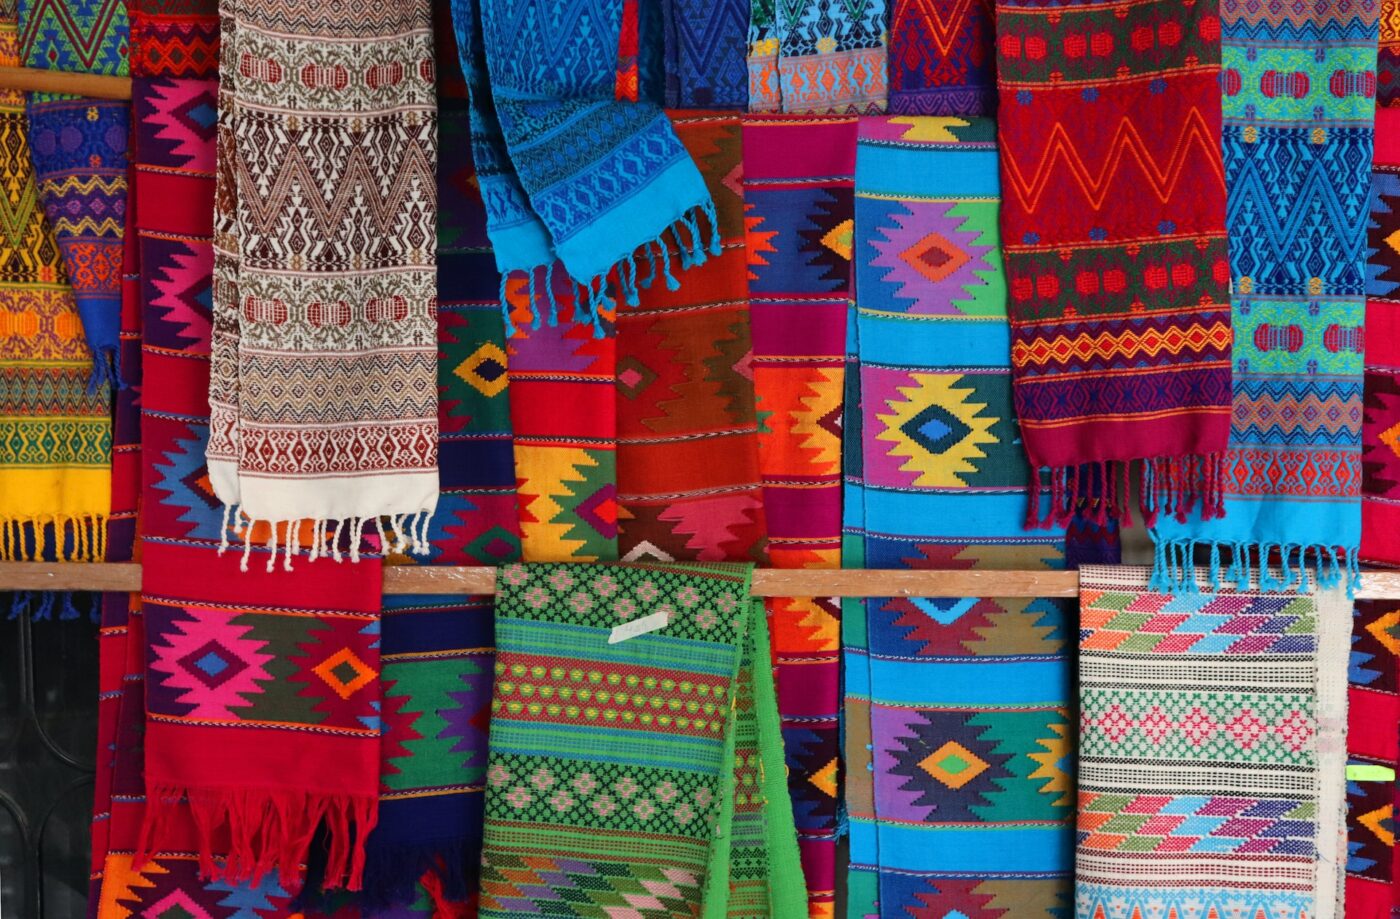 Colourful textiles in display